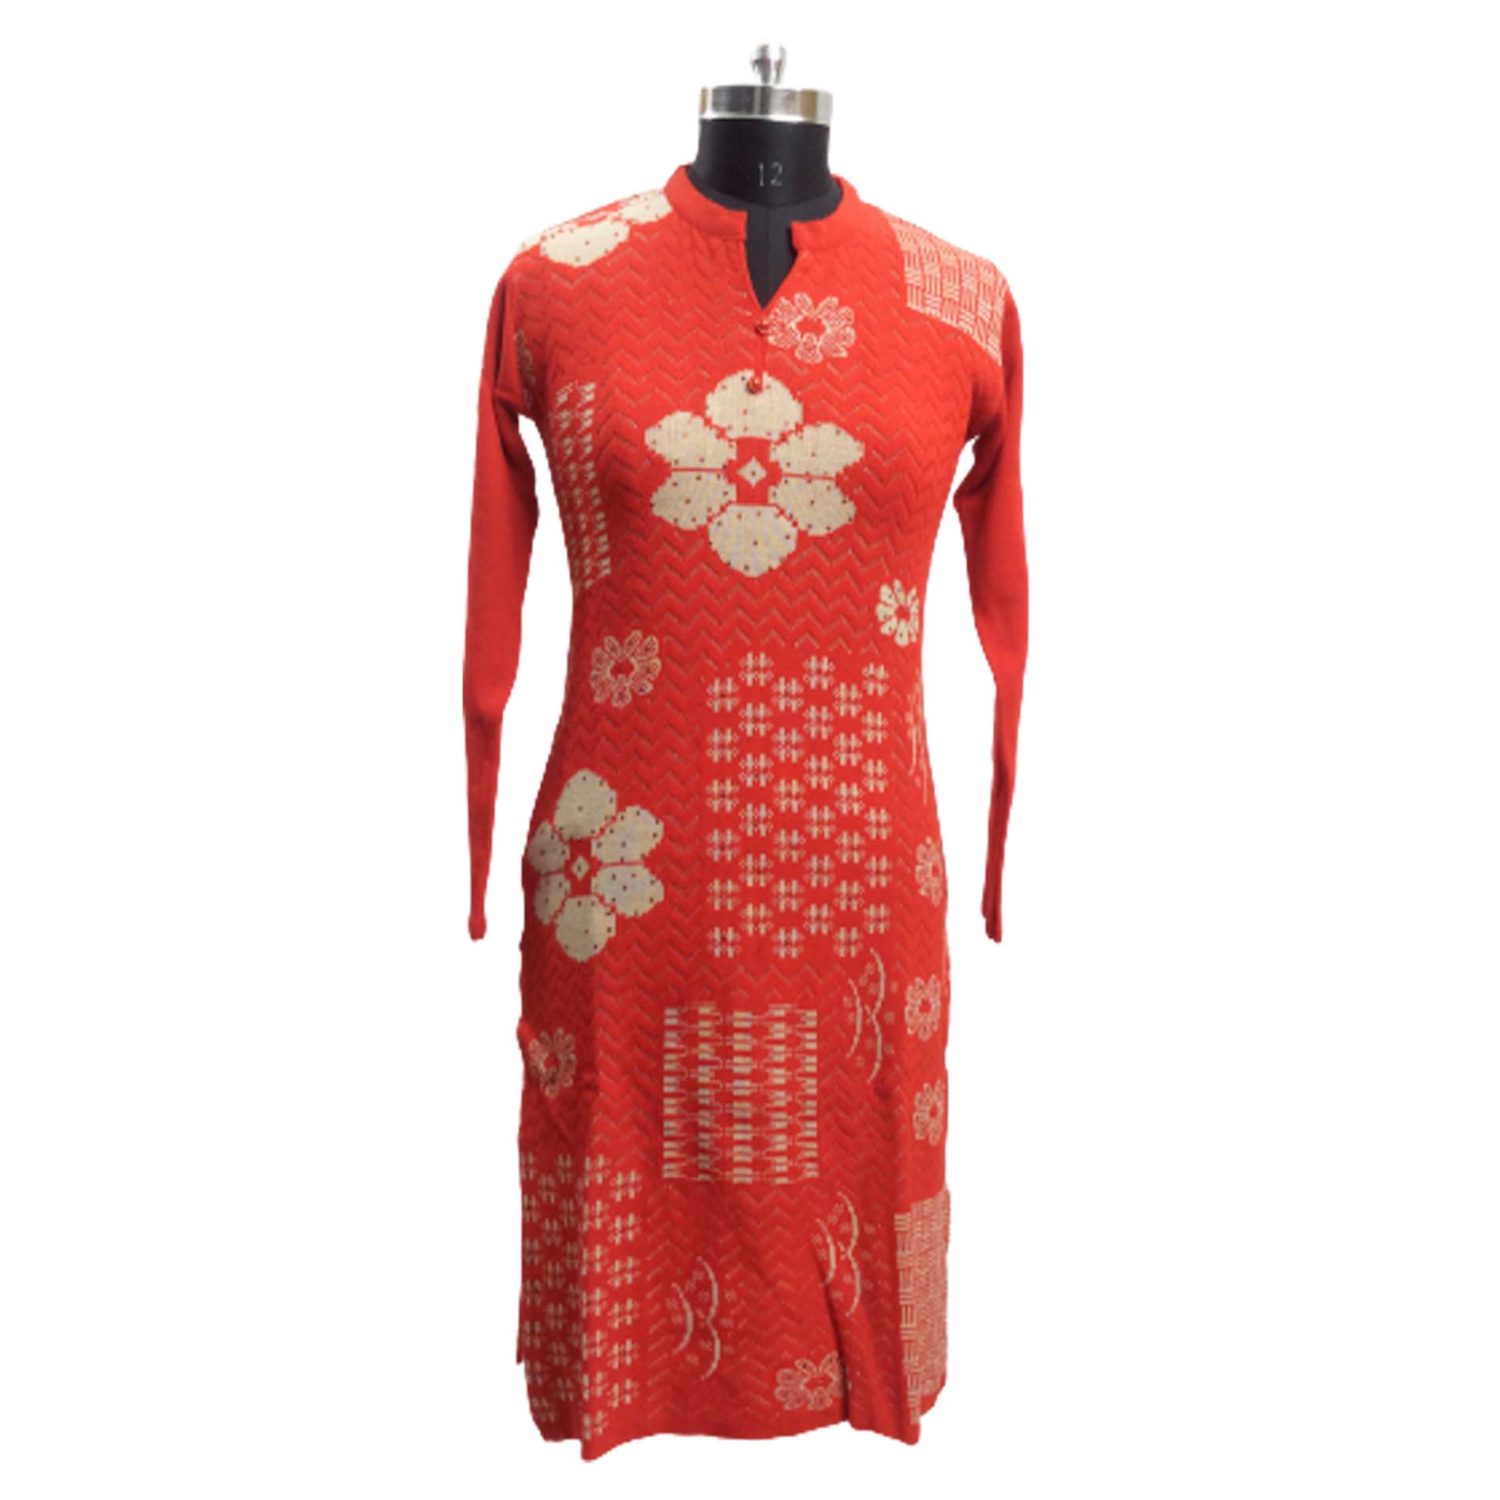 Red Indian Traditional Winter Woolen Long Kurti With Side Pocket For Women  | eBay